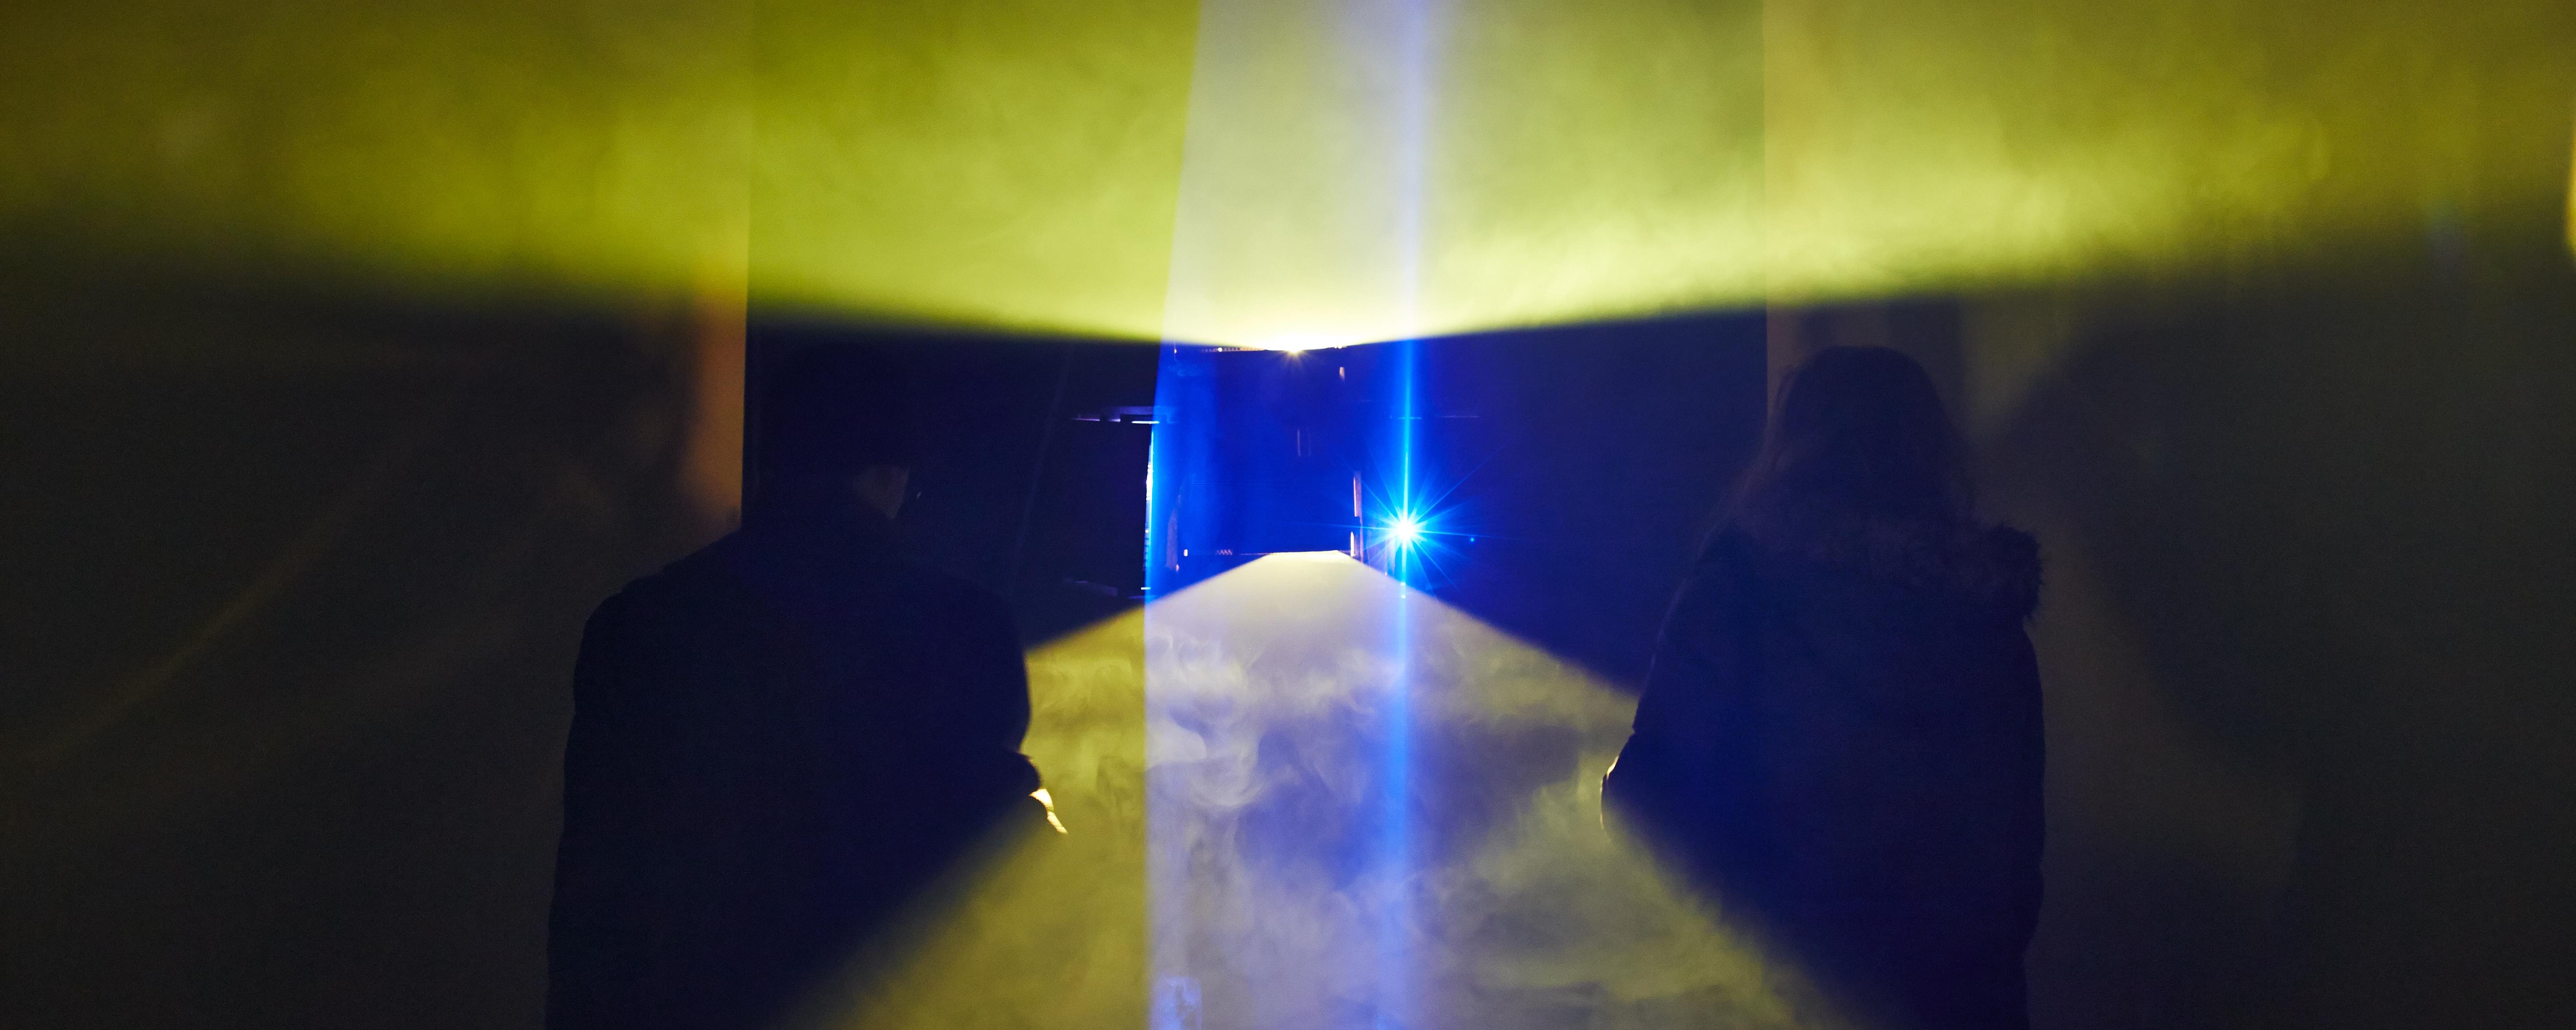 Photograph; planes of yellow light fan out from the top and bottom of the frame; a rectangular black hole in the middle; blue planes of light fan out from the sides. The planes of light reveal fog in the air. Two silhouettes of people with their backs to the camera are probably wondering what the fuck is going on.